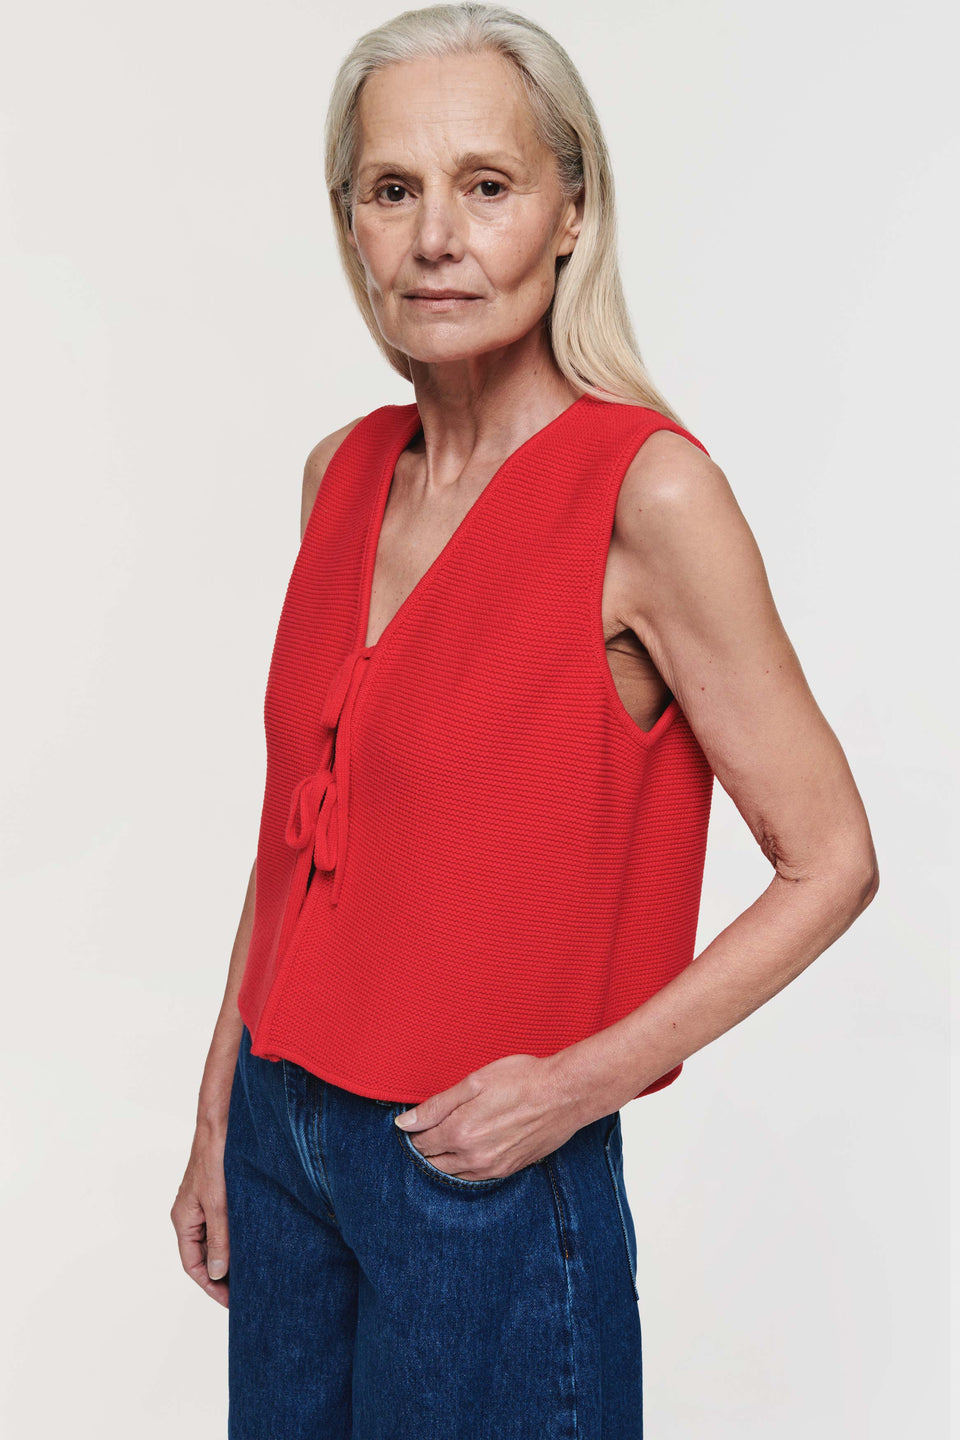 Finished in a vibrant red tone, Aligne's Isla  knitted tie tank top is a standout piece and sunny day essential. Crafted in 100% organic cotton, it has a v-neck and front tie fastening. Complete the look with a pair of shorts for a casual, effortless look or style with jeans or a denim skirt.